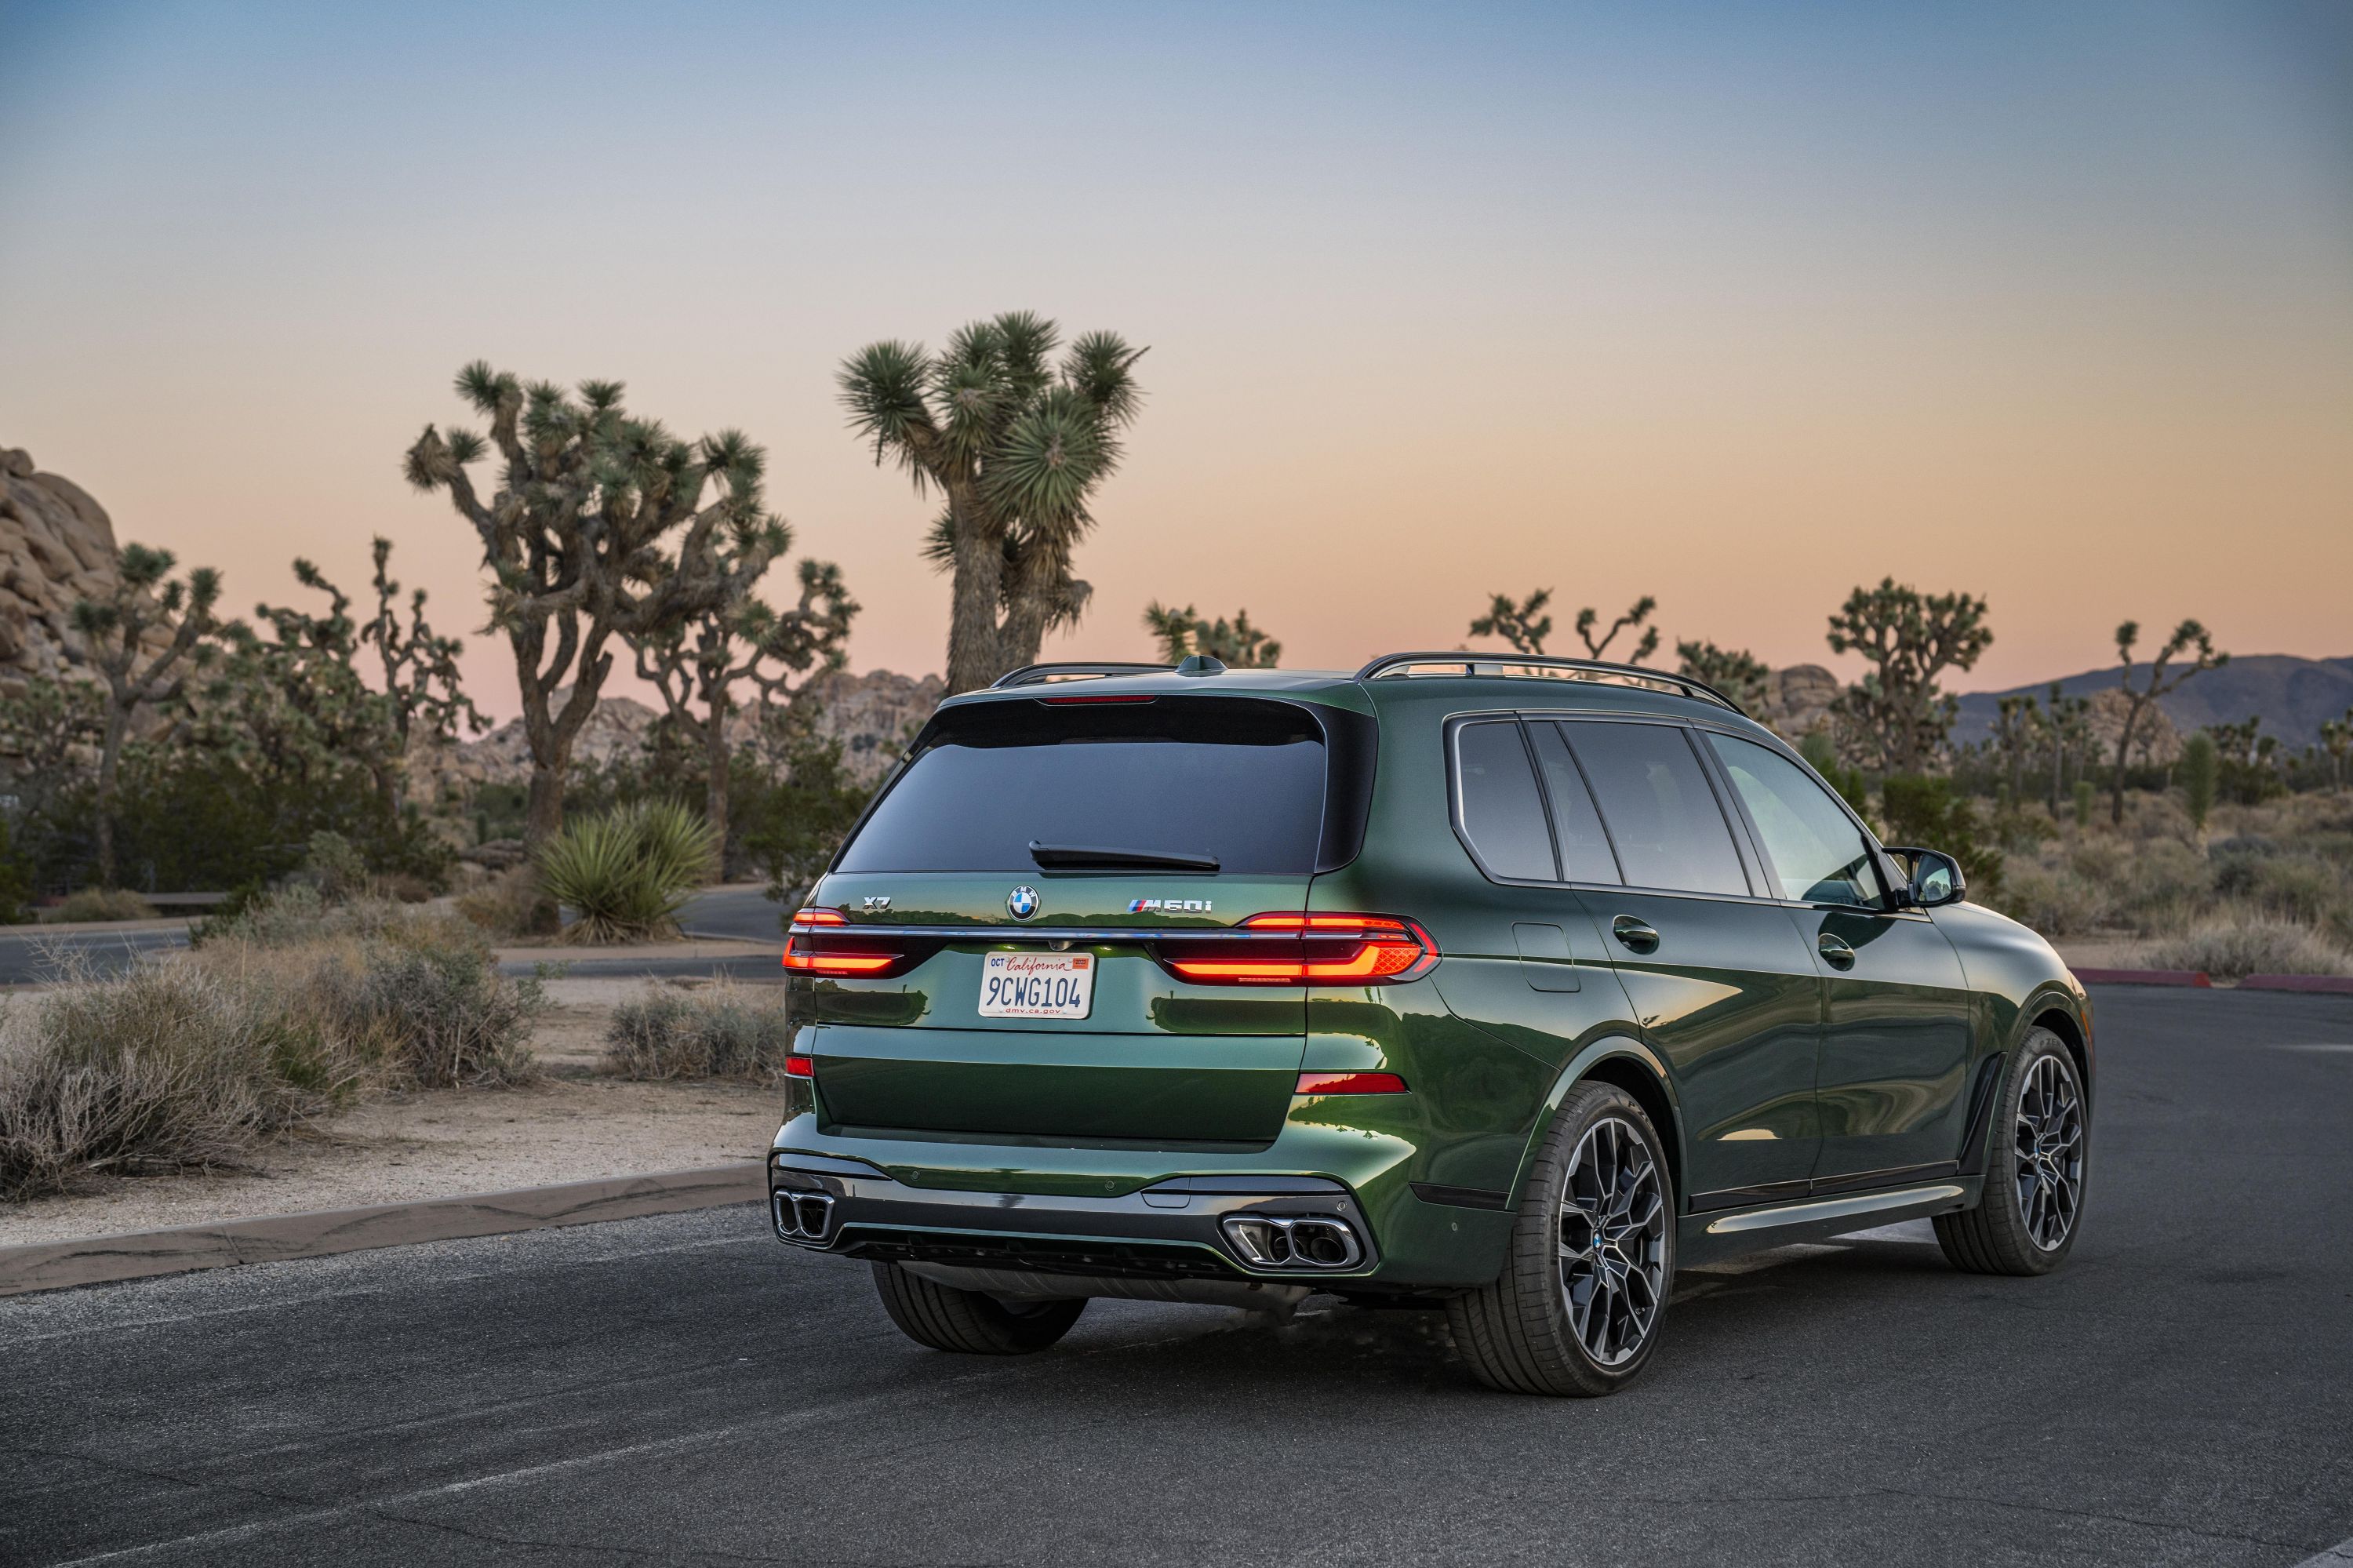 Review: The 2023 BMW X7 Is More New Than It Appears